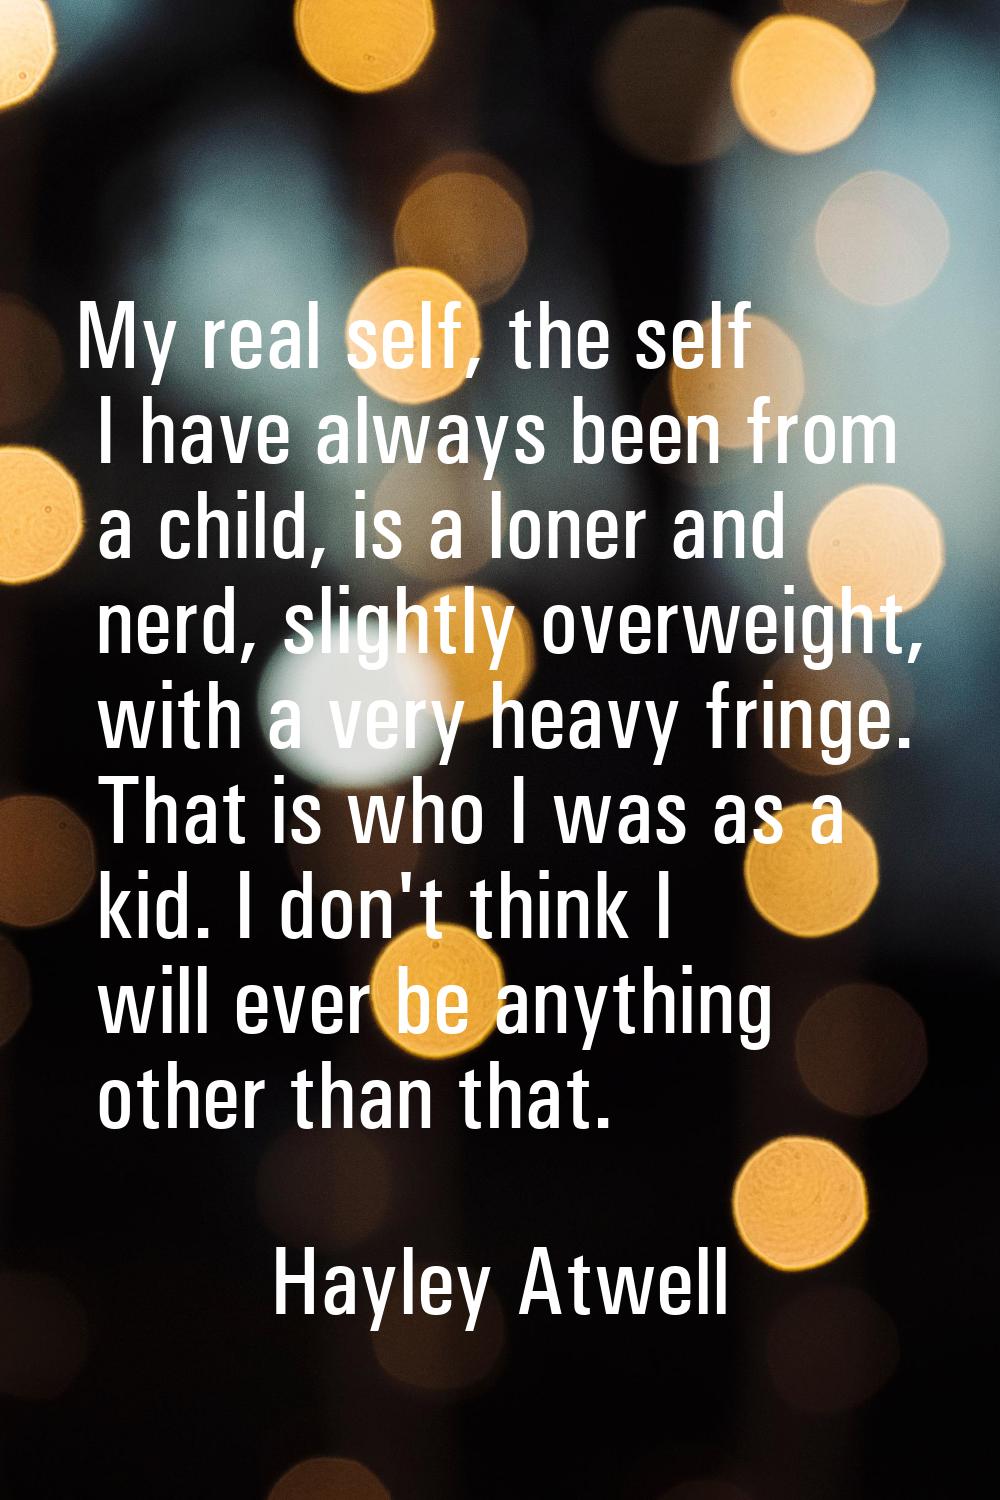 My real self, the self I have always been from a child, is a loner and nerd, slightly overweight, w